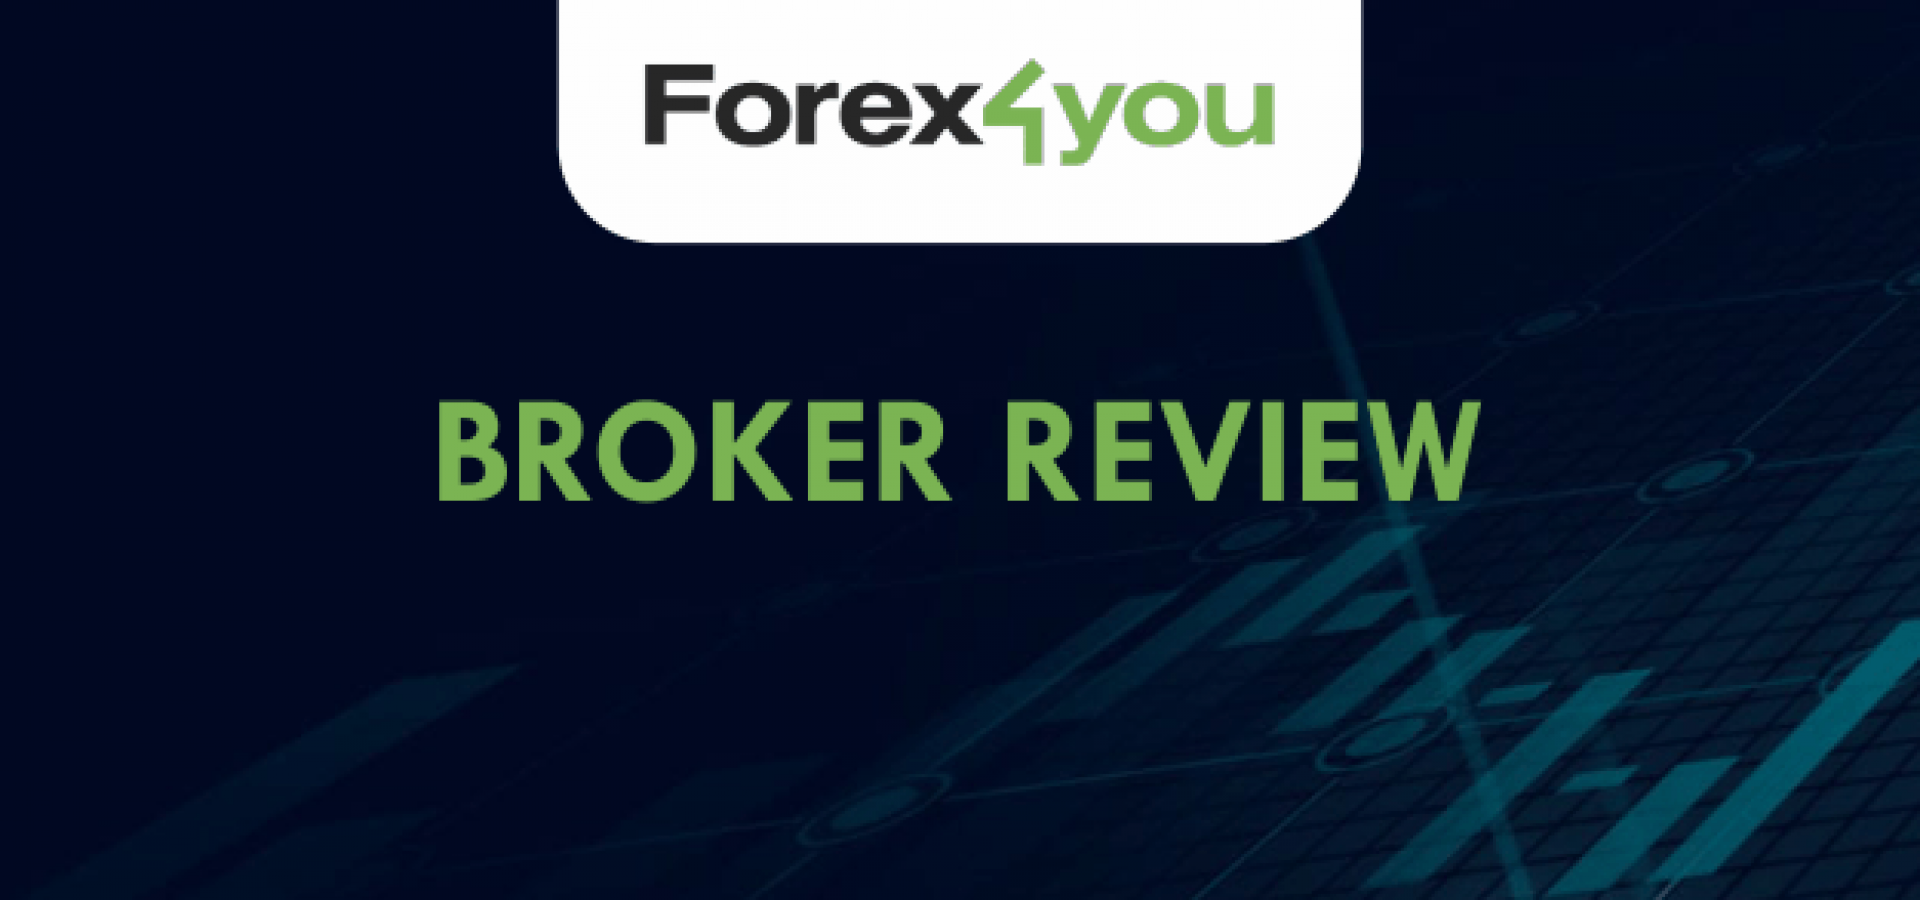 Forex4You Broker Review